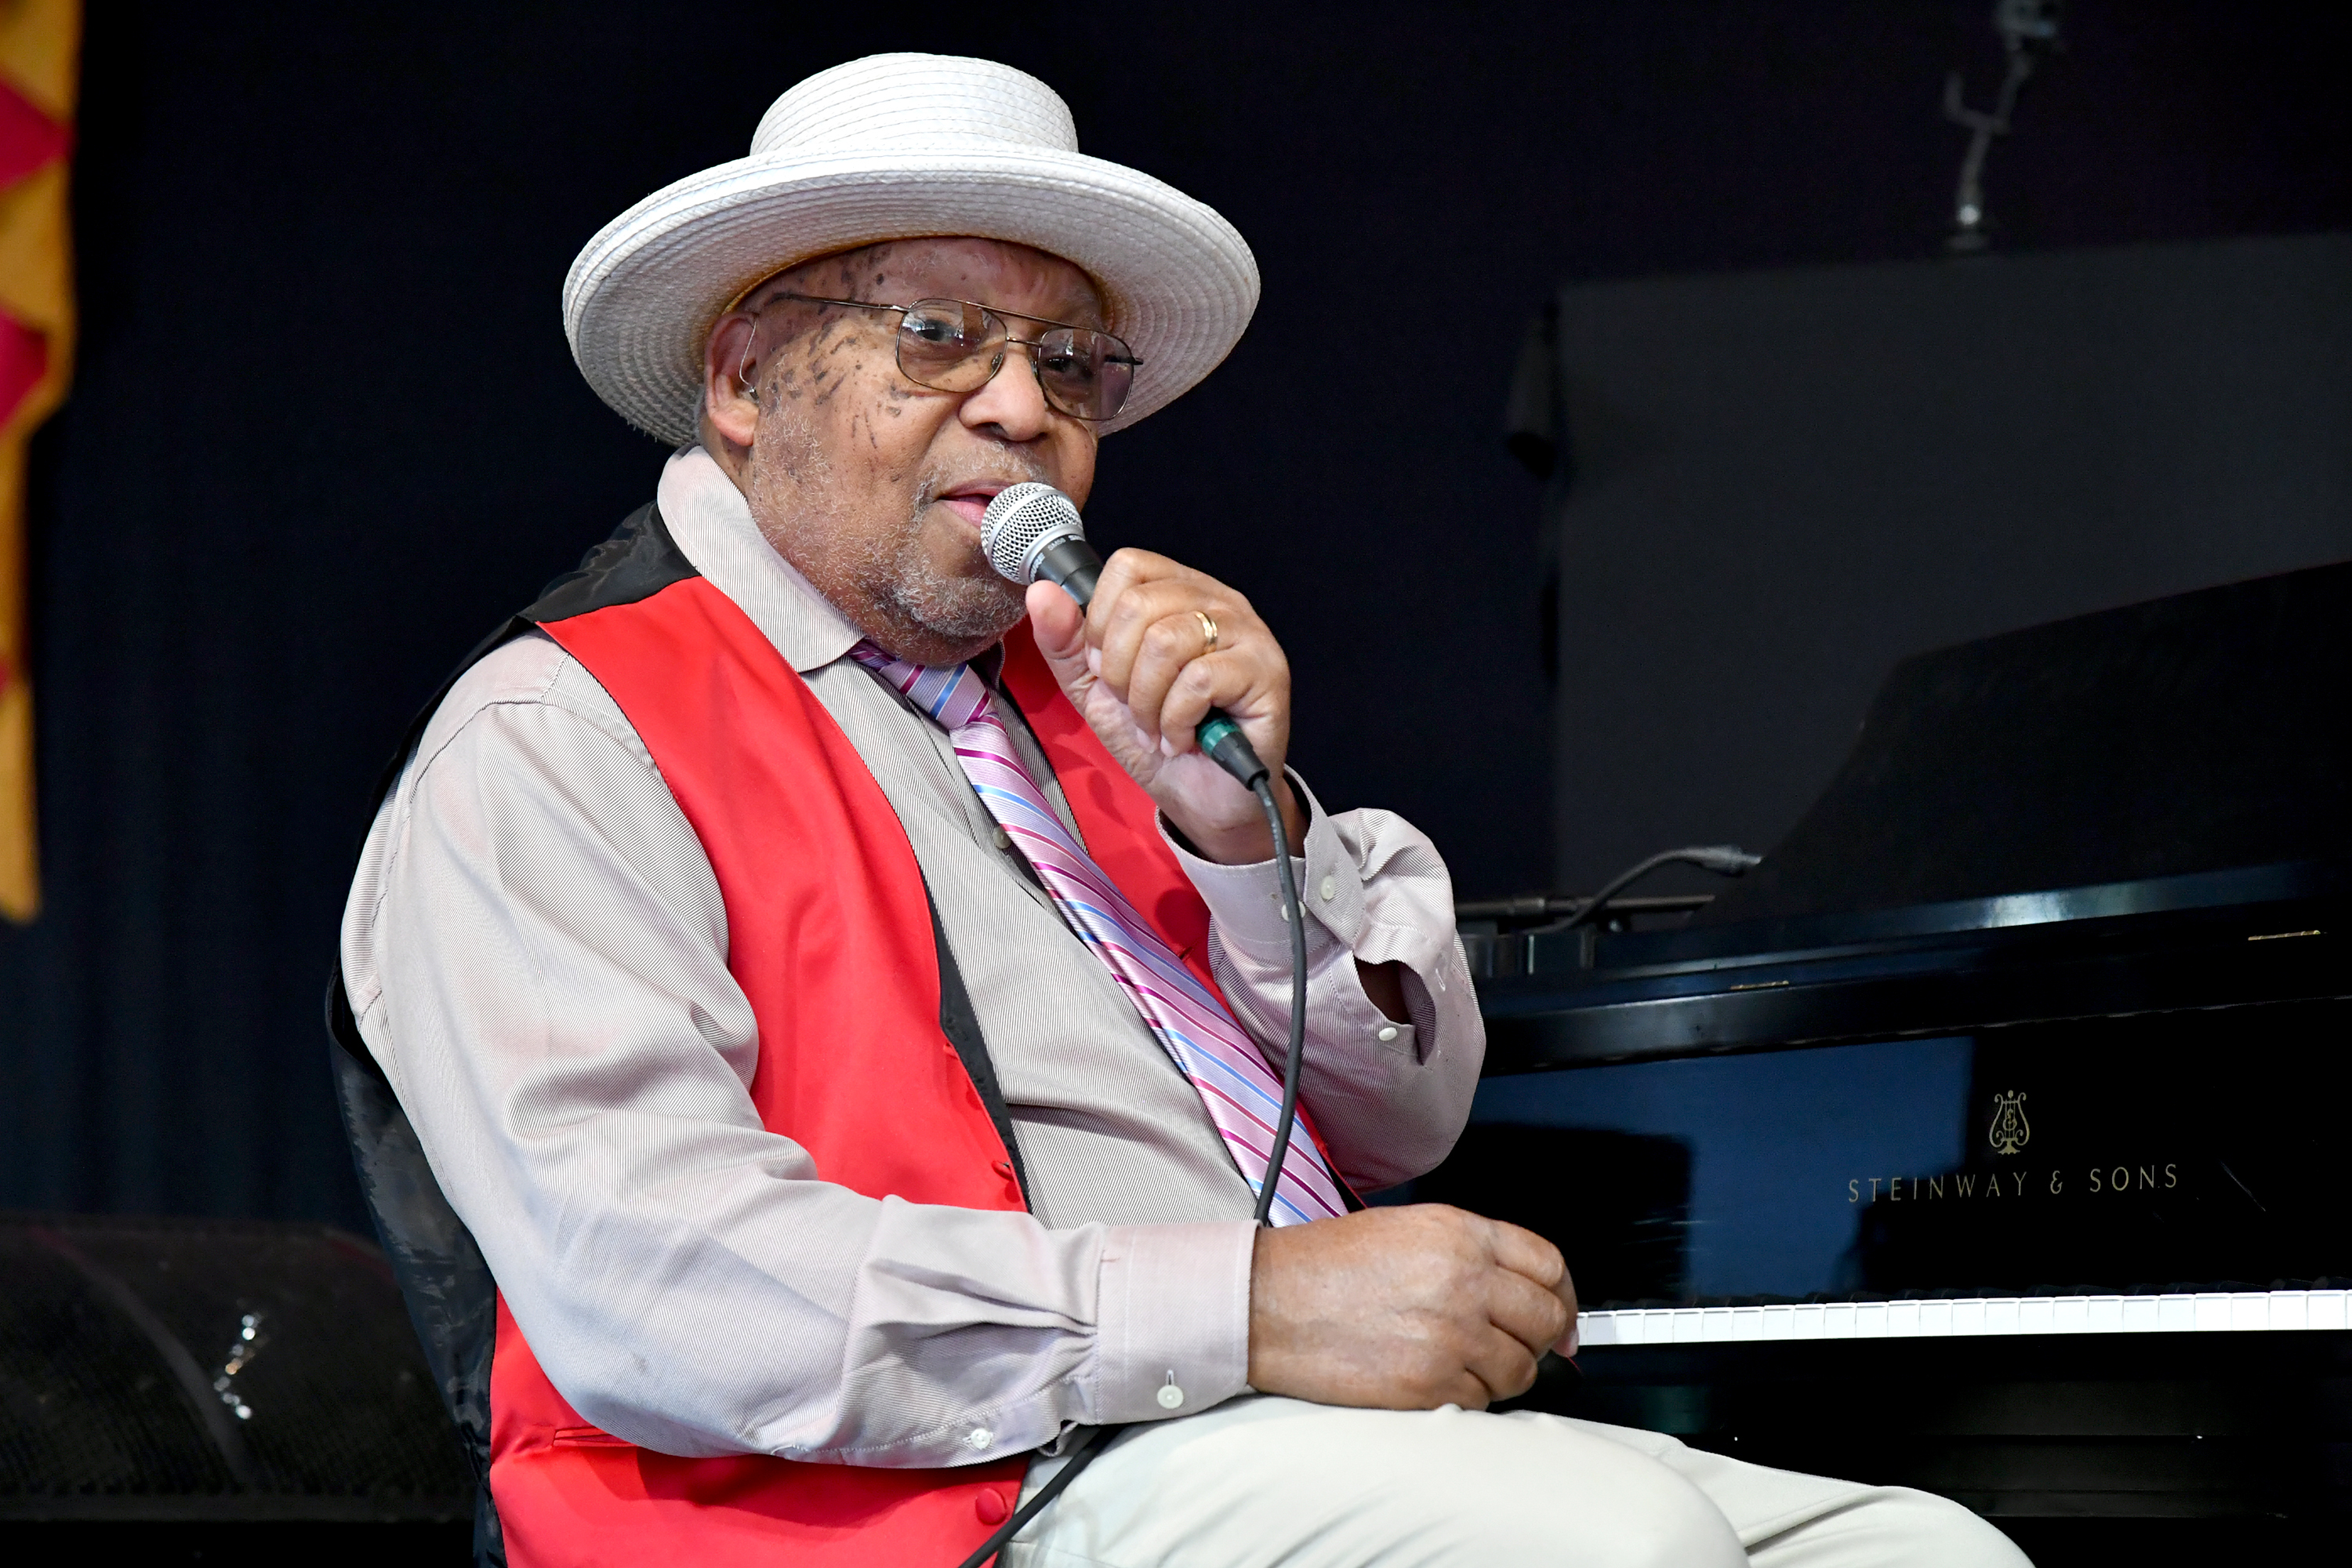 <p>Jazz pianist Ellis Marsalis Jr. died on April 1 from coronavirus-related complications. The legendary musician from New Orleans -- whose children include noted musicians Branford Marsalis and Wynton Marsalis -- was 85. Said Branford, "My dad was a giant of a musician and teacher, but an even greater father. He poured everything he had into making us the best of what we could be."</p>